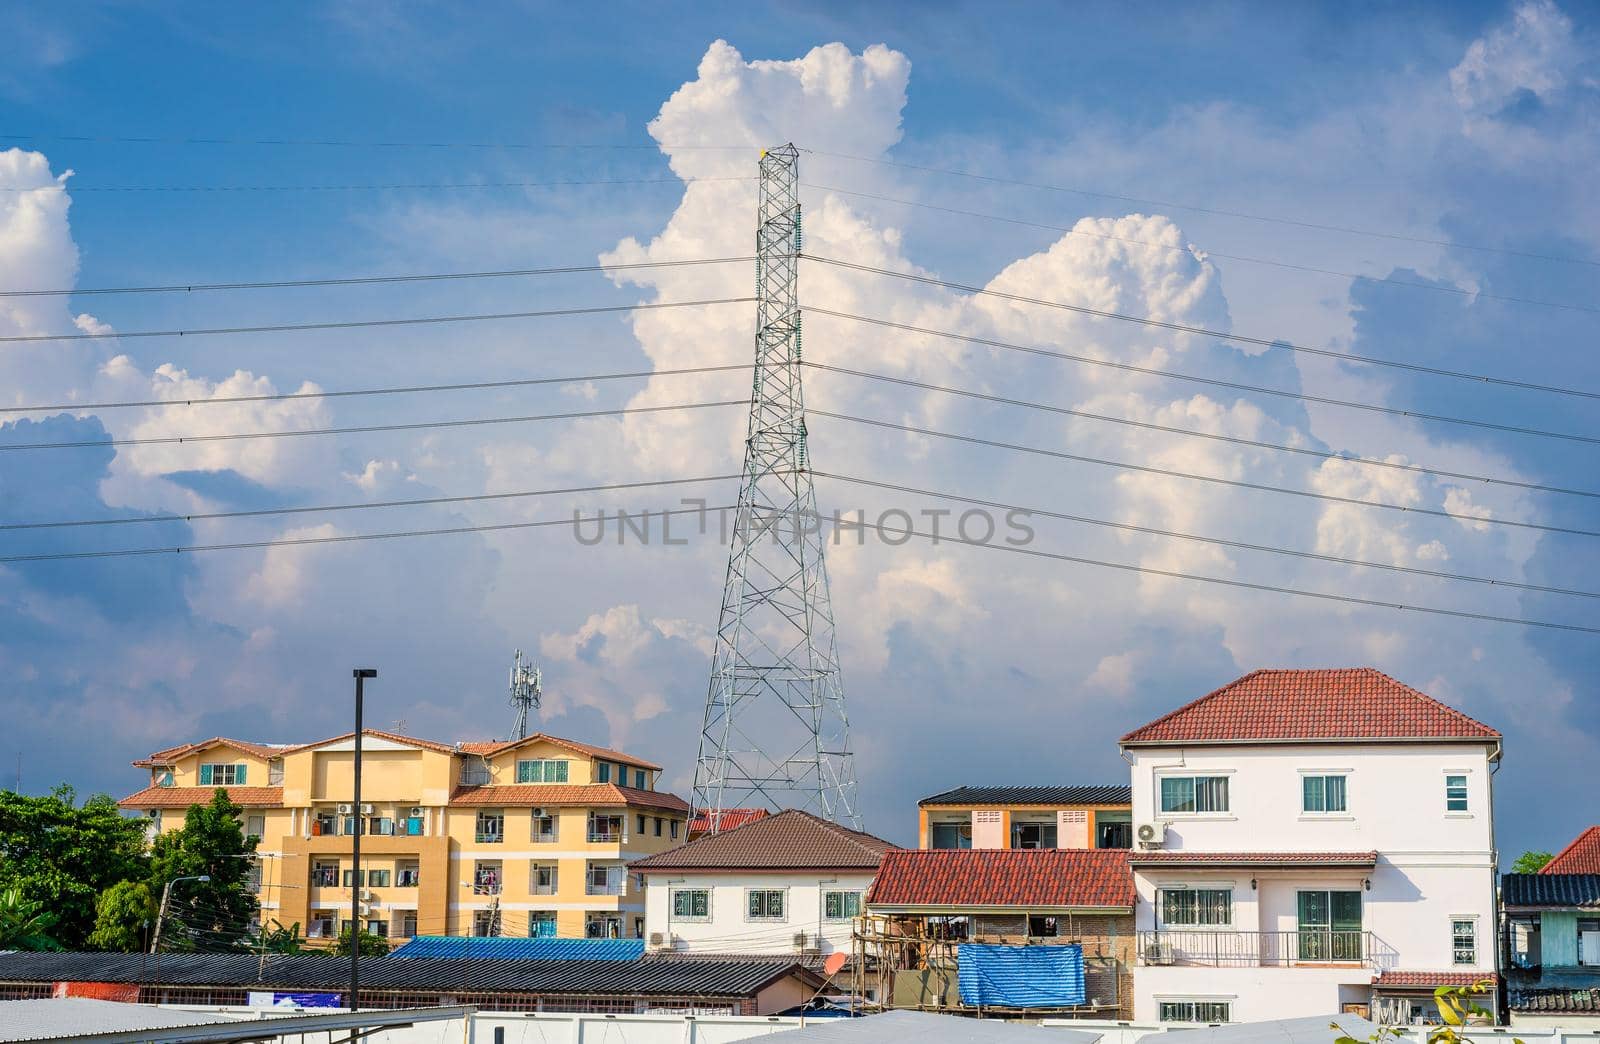 Background of electricity pole system with home in city with cloudy sky